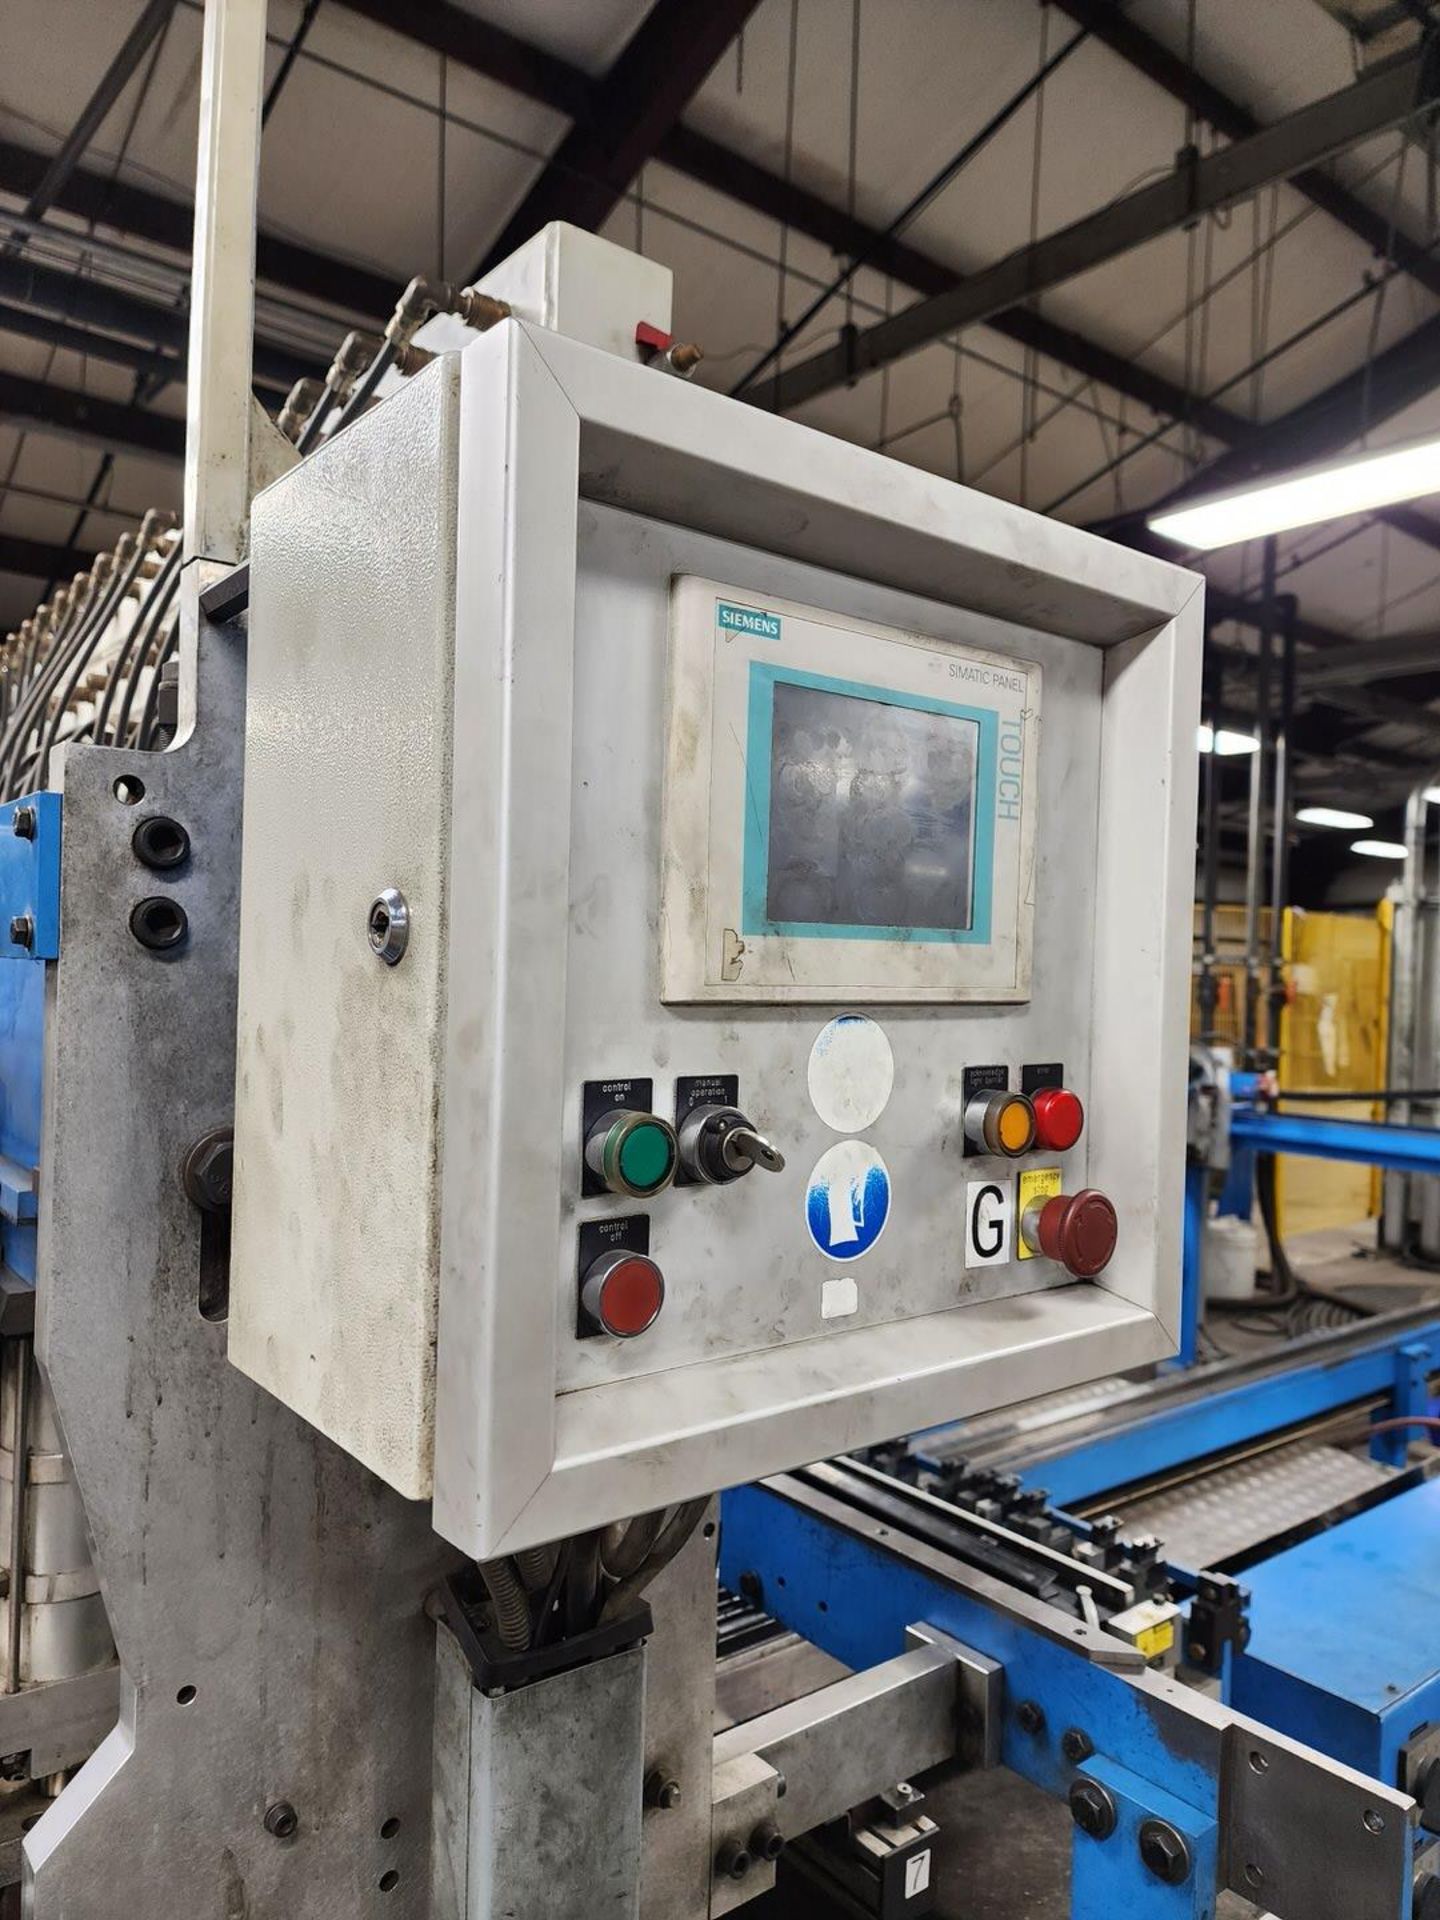 Ideal GAE516 CNC Wire Mesh Welder 50/60HZ, 480V, 1200A; W/ Siemens Simatic Panel Controller - Image 16 of 57